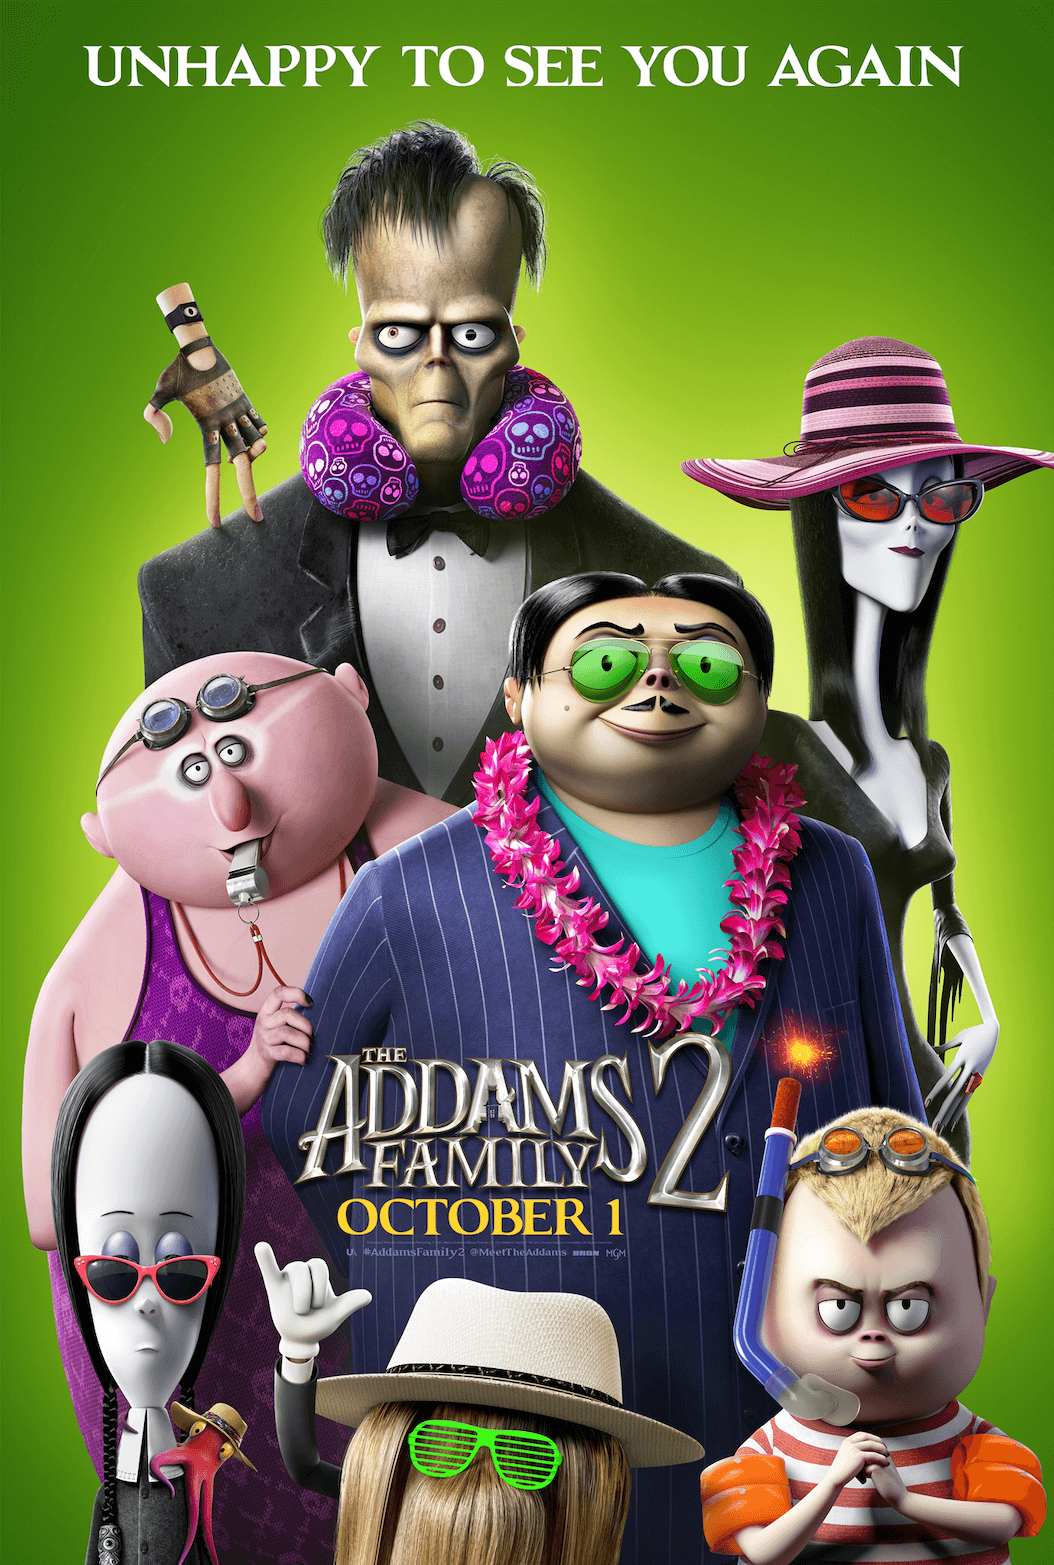 Watch The Addams Family 2 Official Trailer | The New Film Hits Theaters October 1st